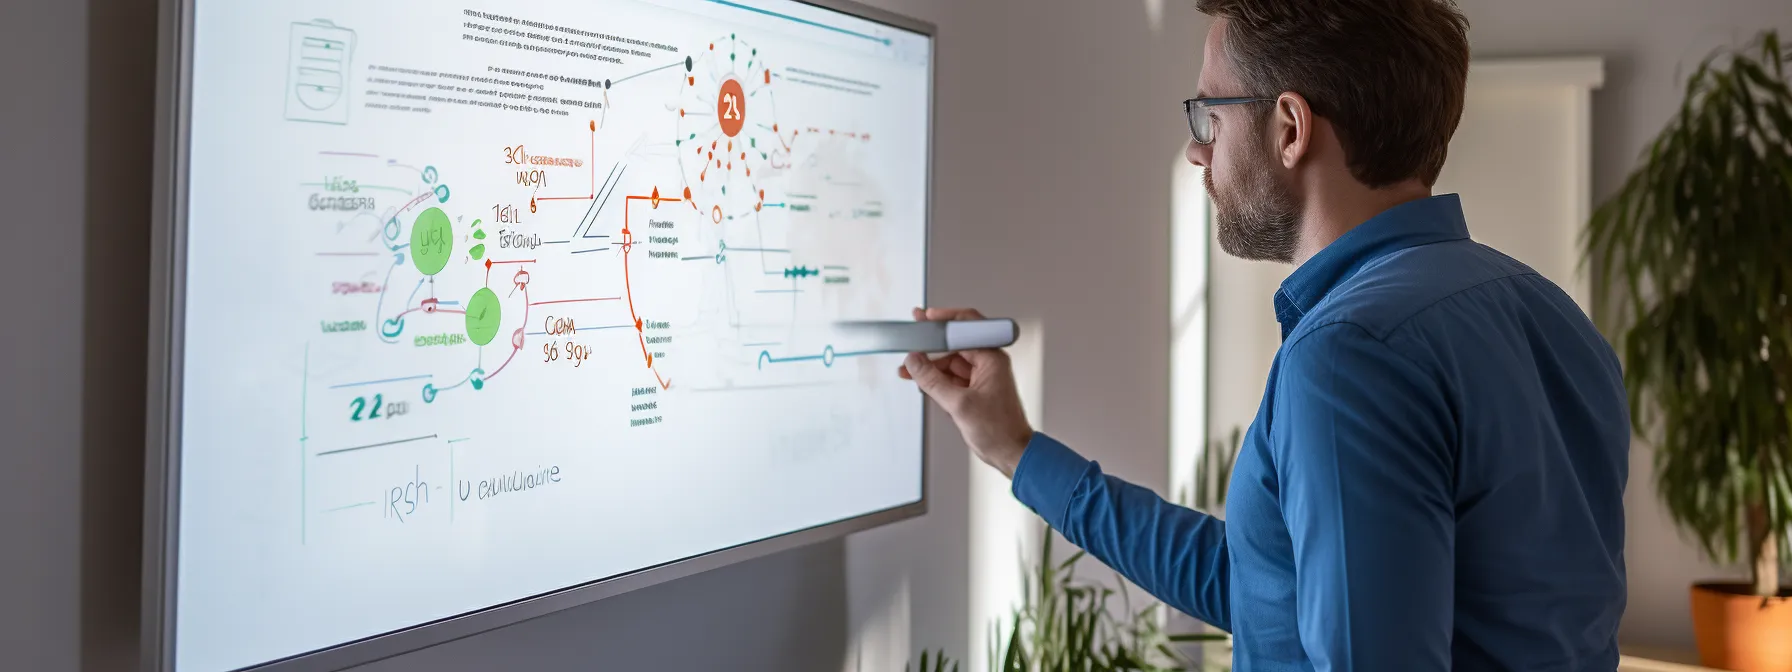 a person studying a whiteboard with keyword clustering strategies and seo ranking impact written on it.